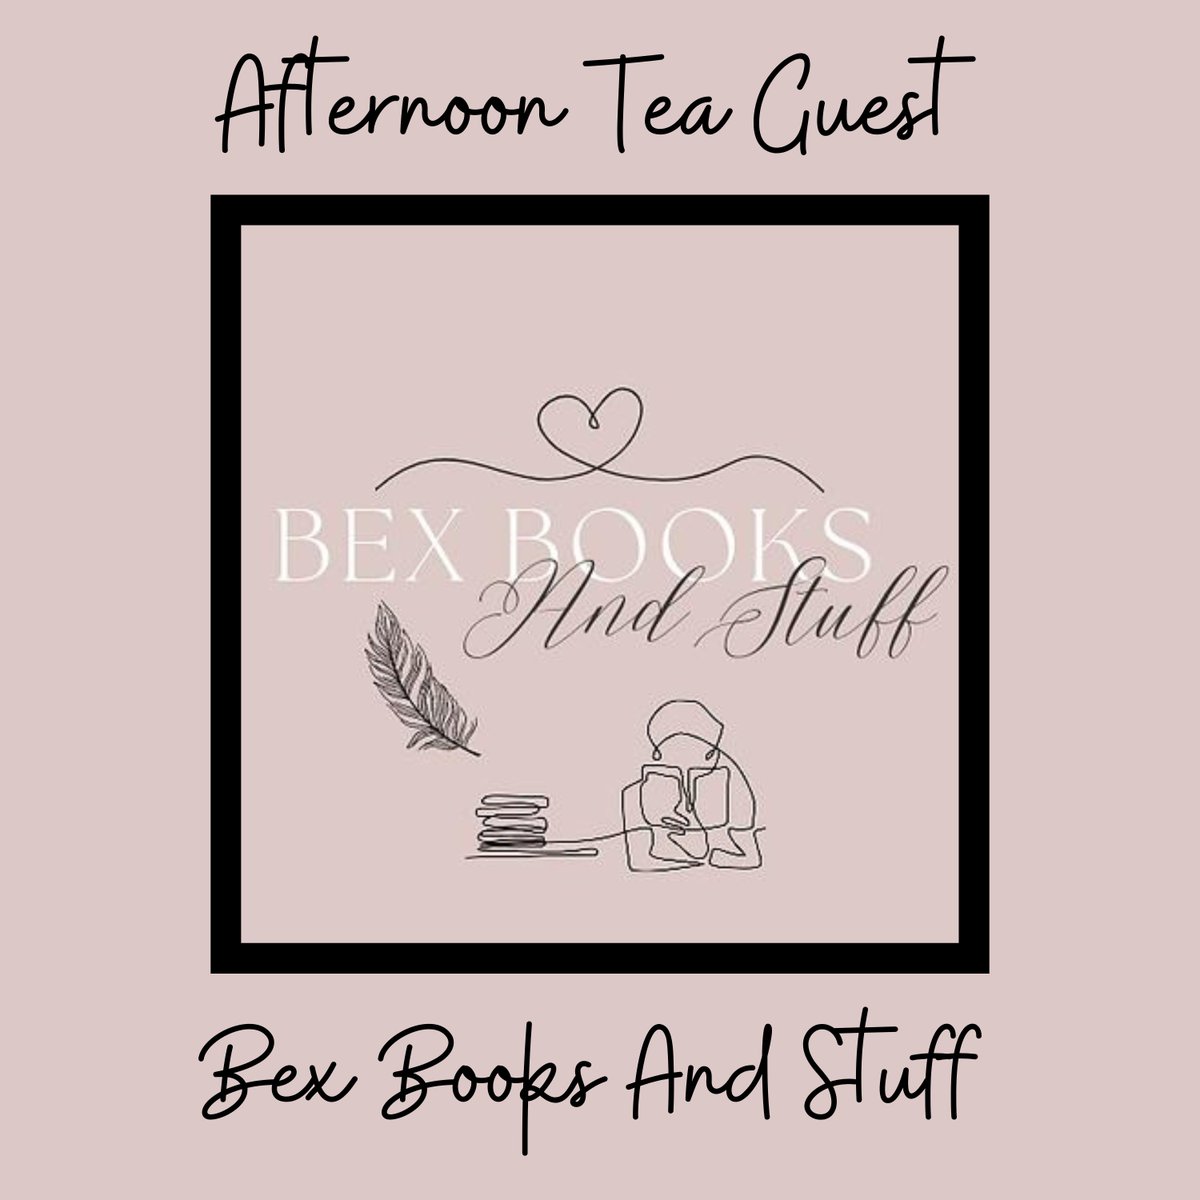 Look who came to join us for #AfternoonTea

@bexbooks_stuff 

Bex is a teacher, wife, mother, and bookworm who shares her thoughts and book reviews on her blog, Instagram, Twitter, and Goodreads!

Check out her blog today!

bexbooksandstuff.com